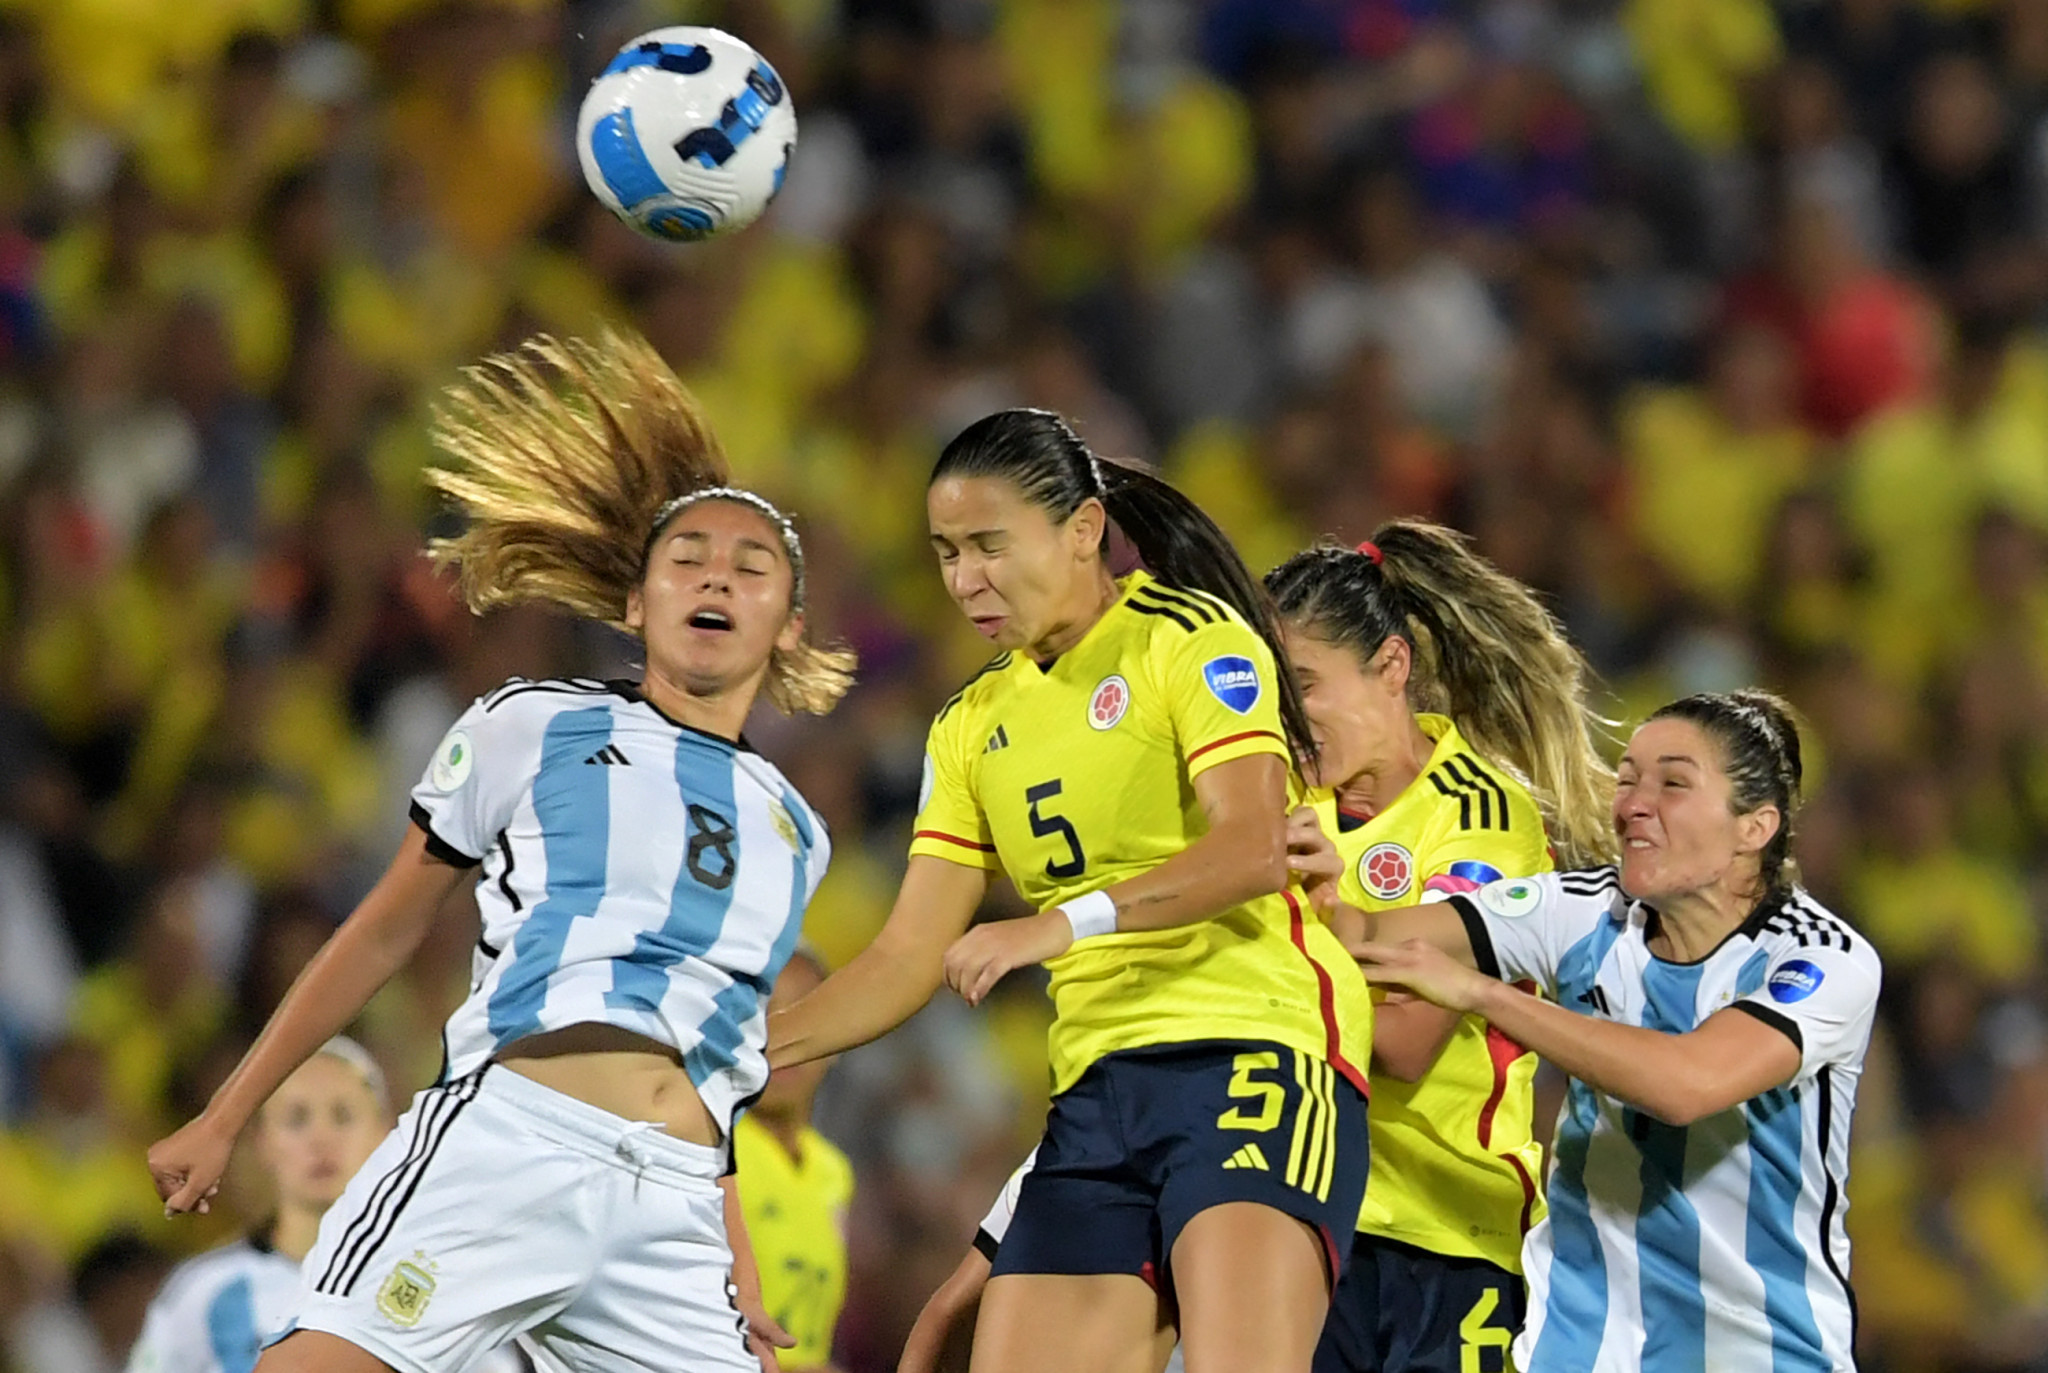 Colombia, playing in yellow, earned a place at the Paris 2024 Olympics after a hard-fought 1-0 win over Argentina in Bucamaranga ©Getty Images